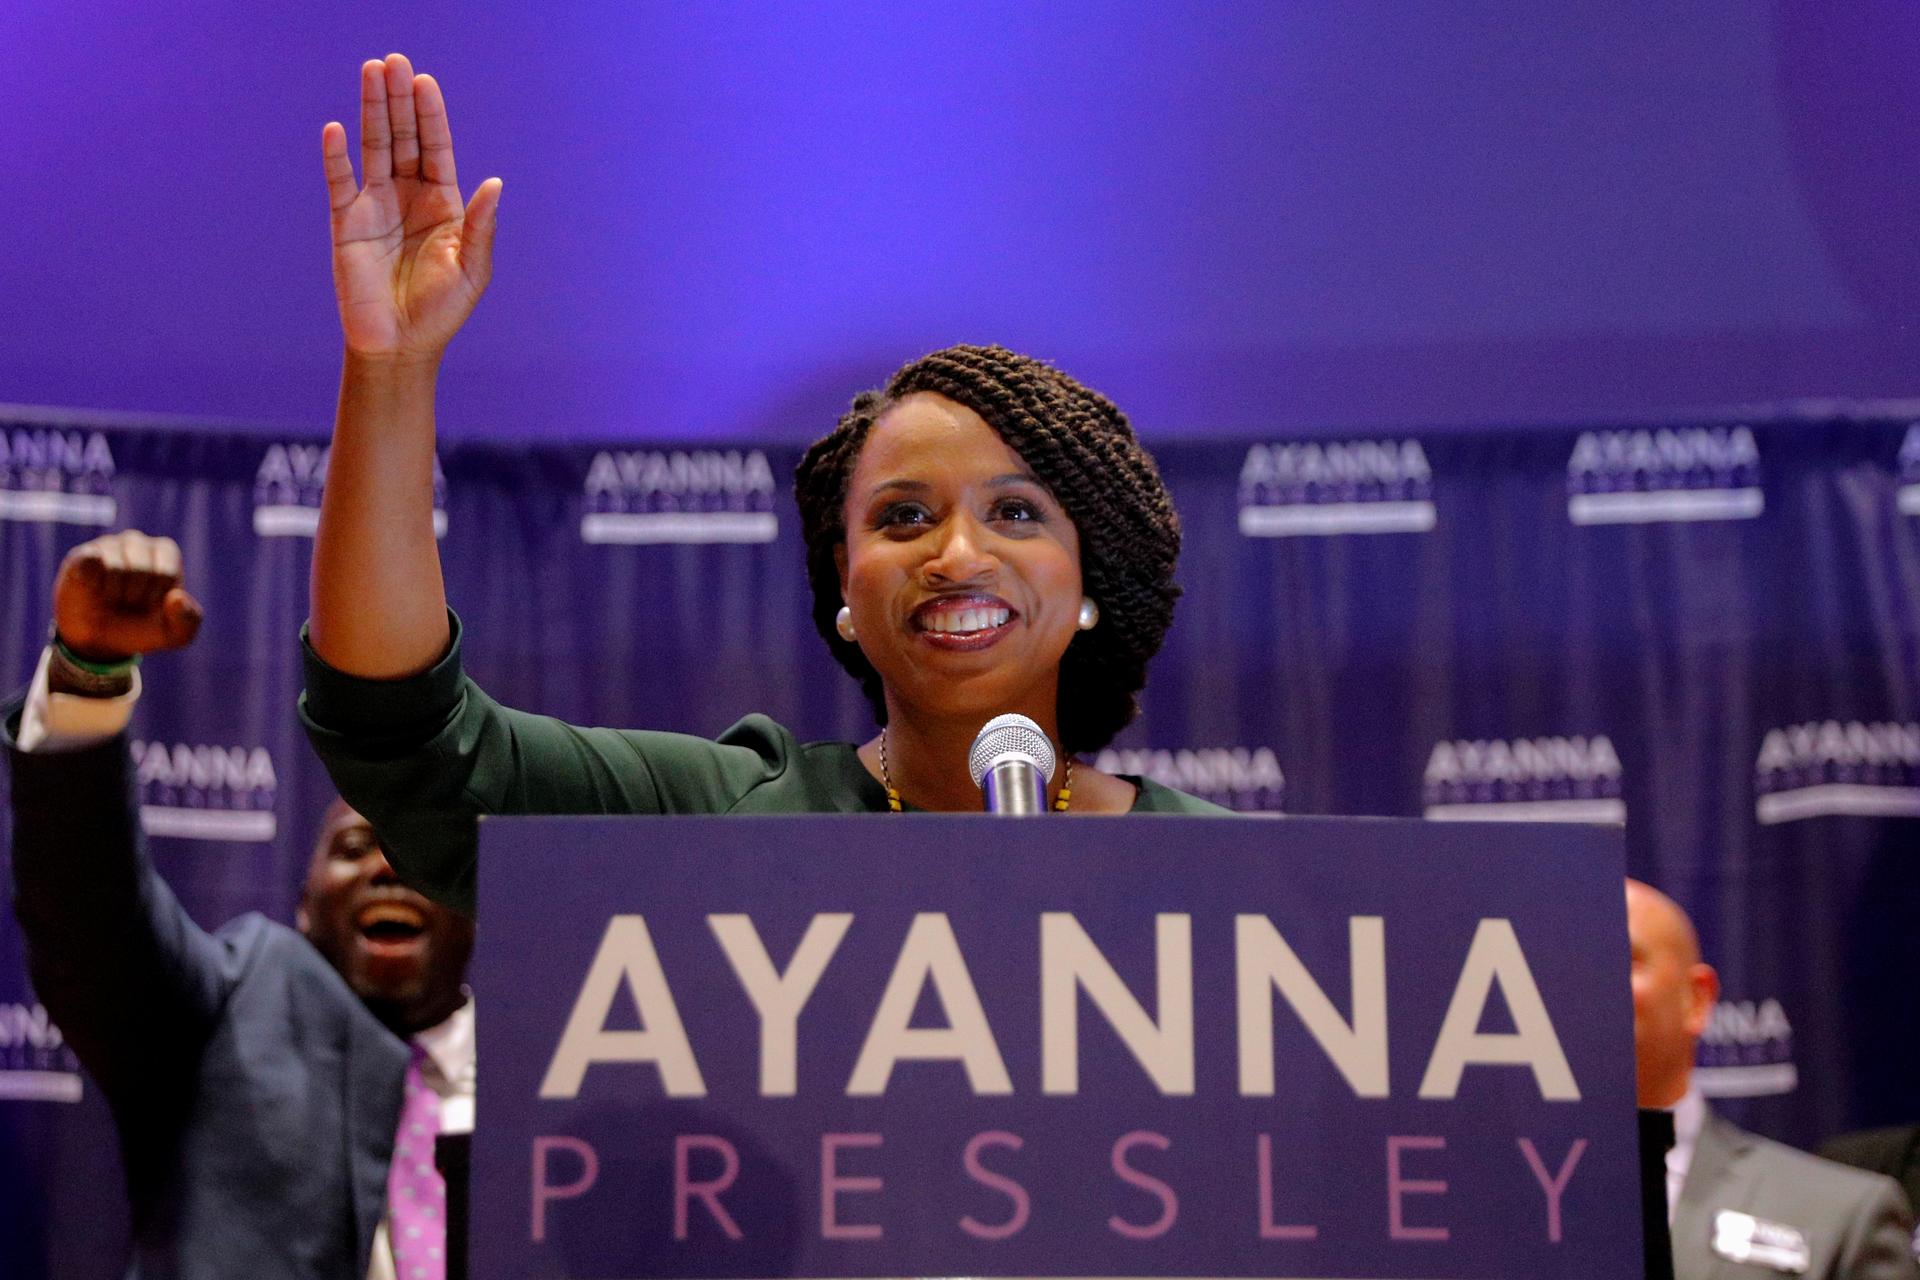 Representative-elect Ayanna Pressley stands behind a podium and waves to the crowd as her husband cheers behind her